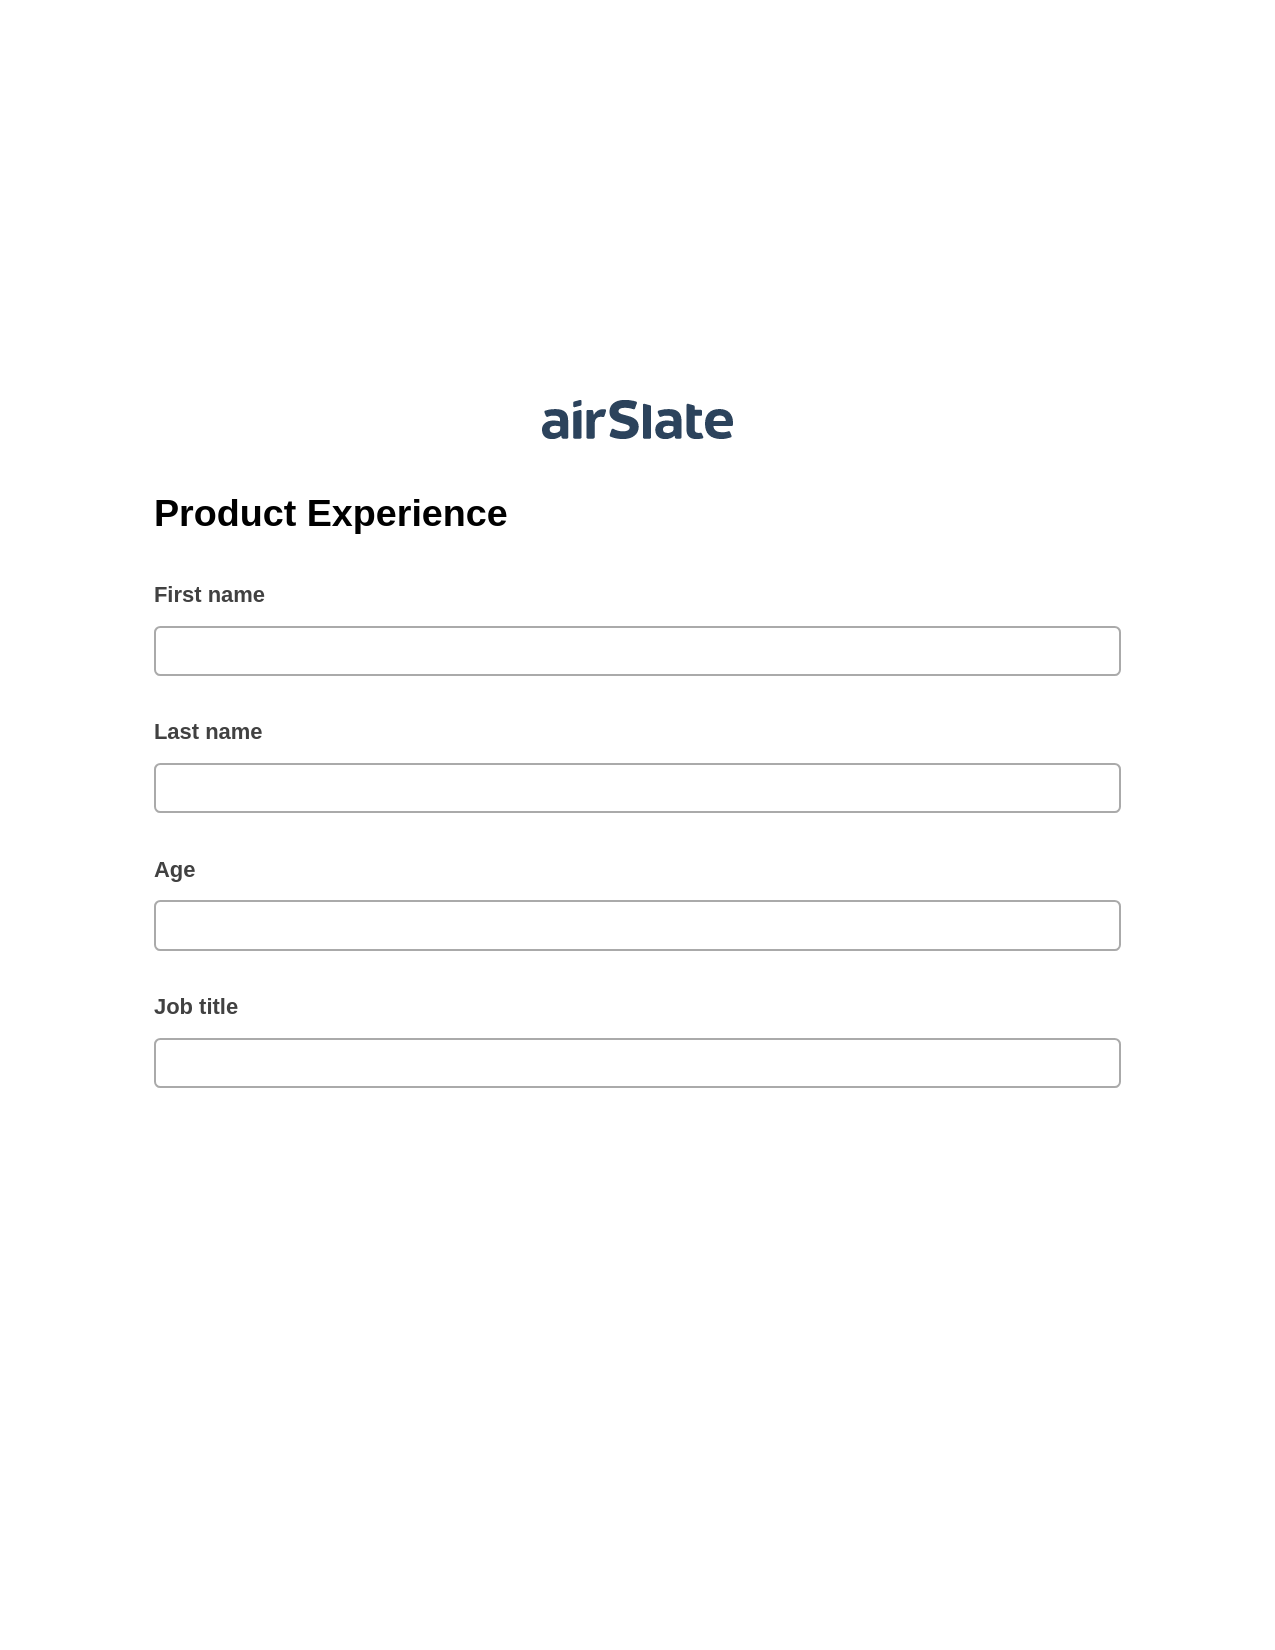 Product Experience Pre-fill from CSV File Bot, Create Salesforce Records Bot, Export to MySQL Bot